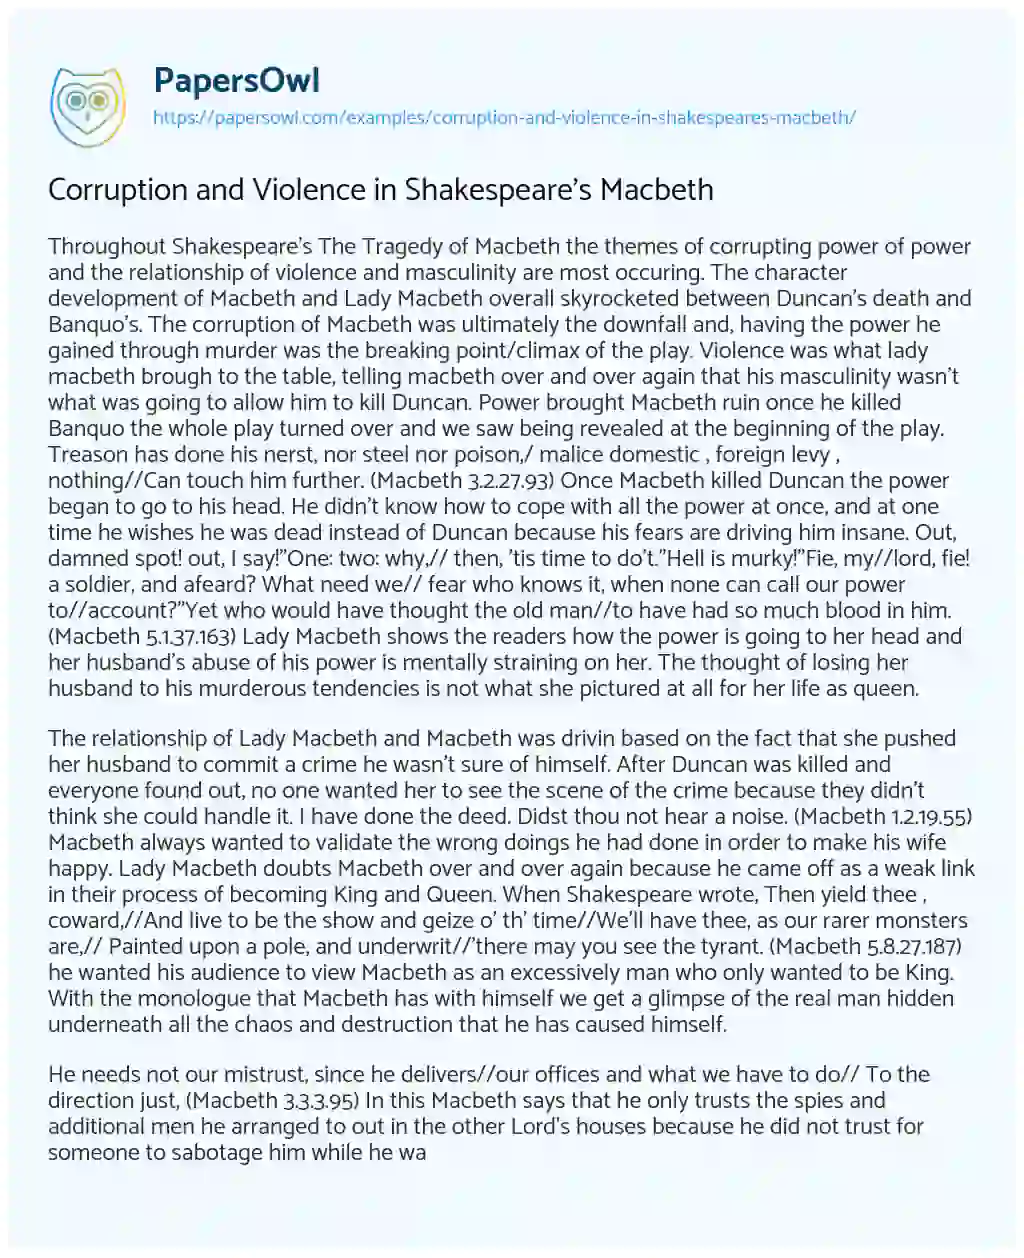 Corruption and Violence in Shakespeare’s Macbeth essay